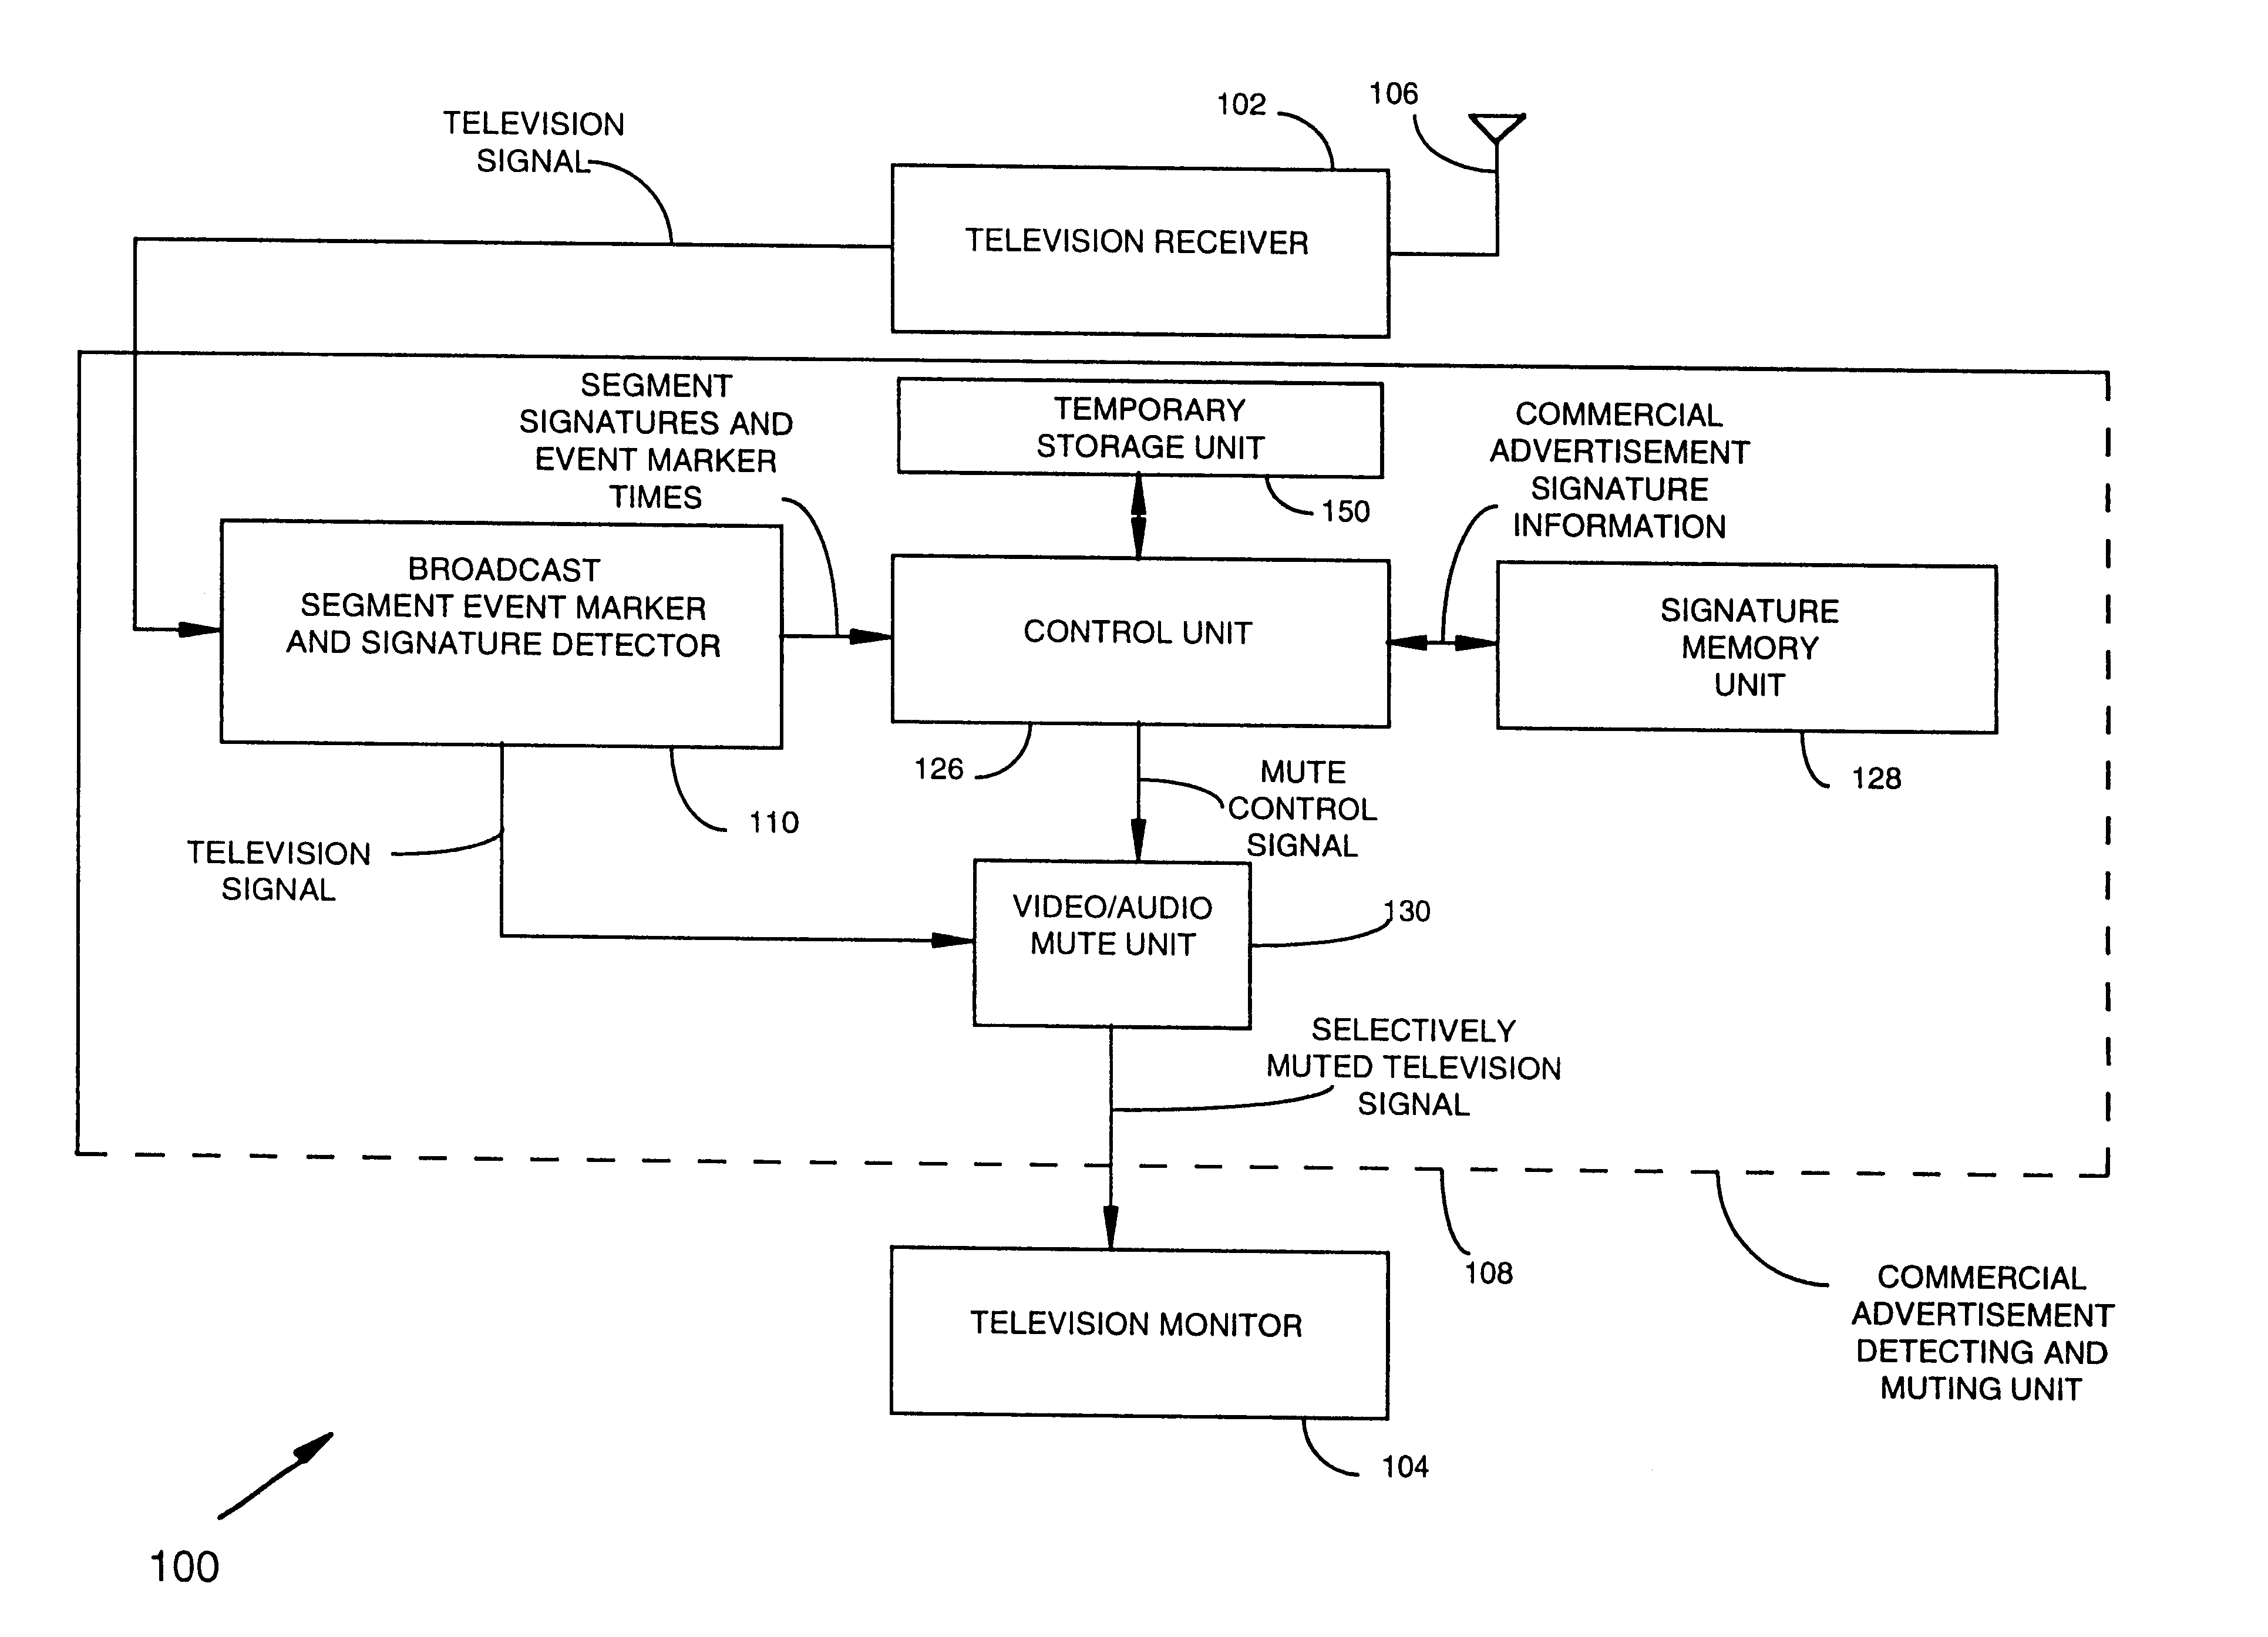 Method and apparatus for automatically identifying and selectively altering segments of a television broadcast signal in real-time